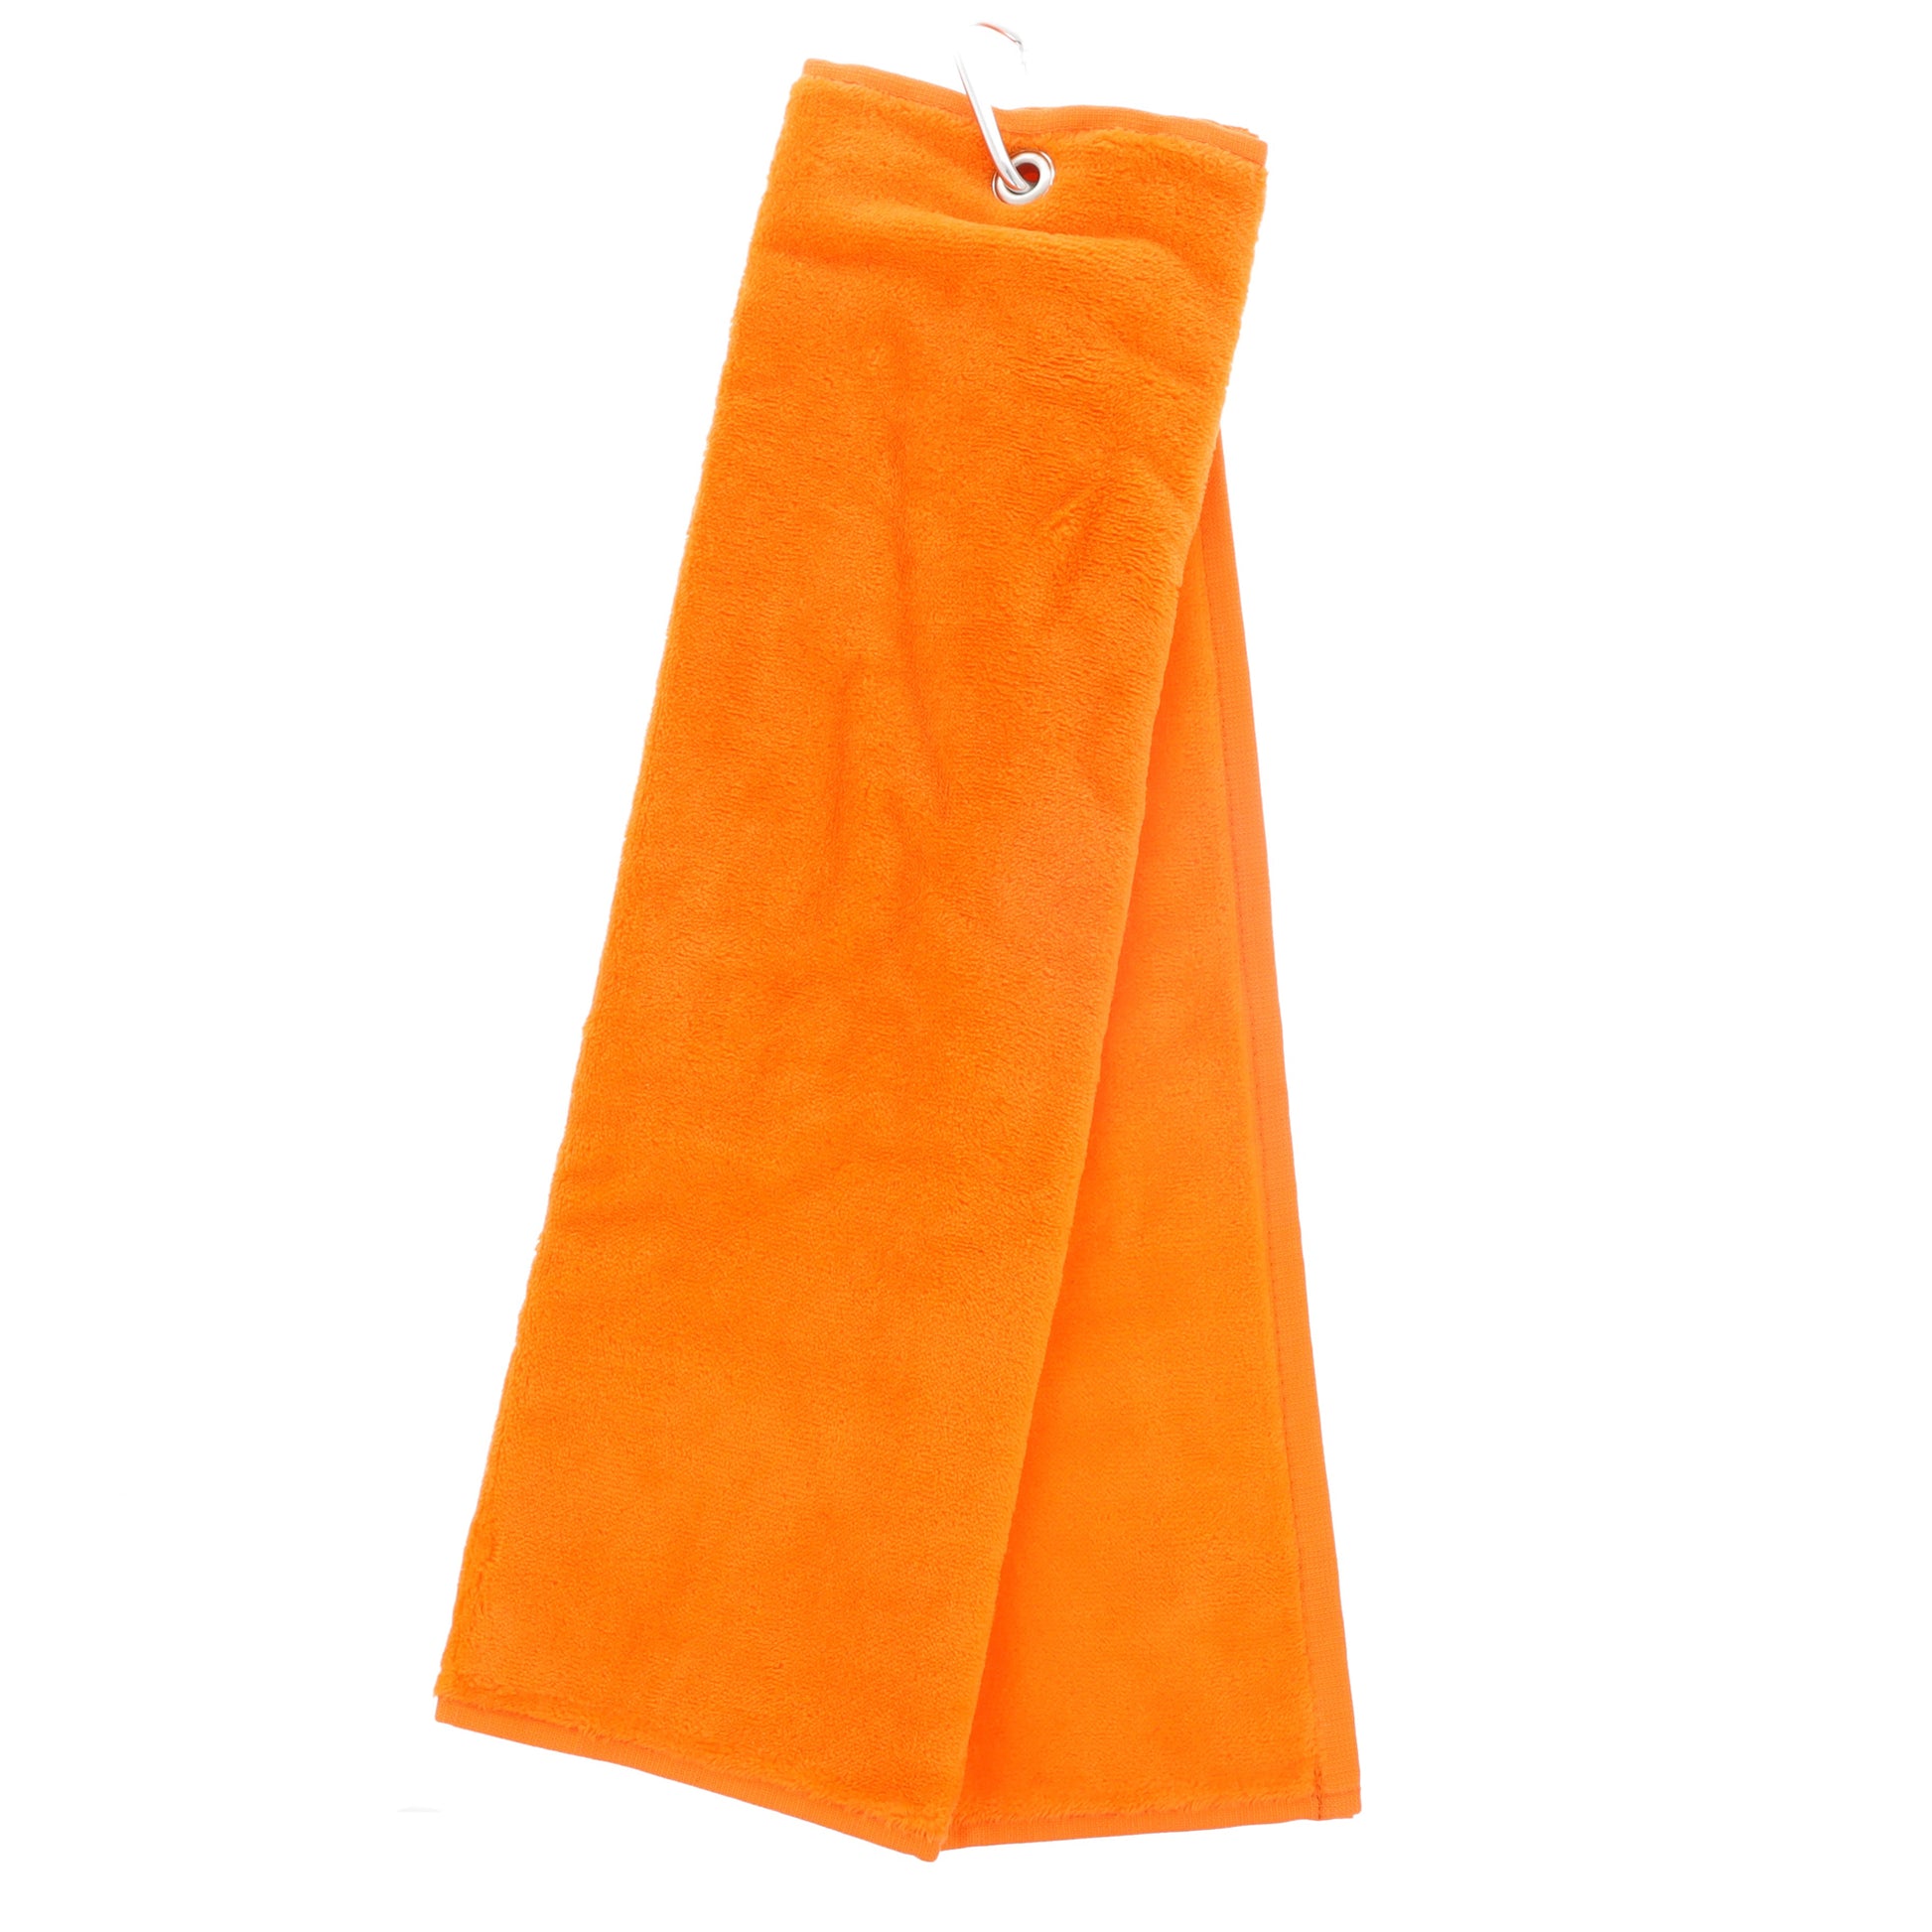 Personalised Embroidered Tri Fold TENNIS Towel Trifold with Carabiner Clip  - Always Looking Good - Orange  